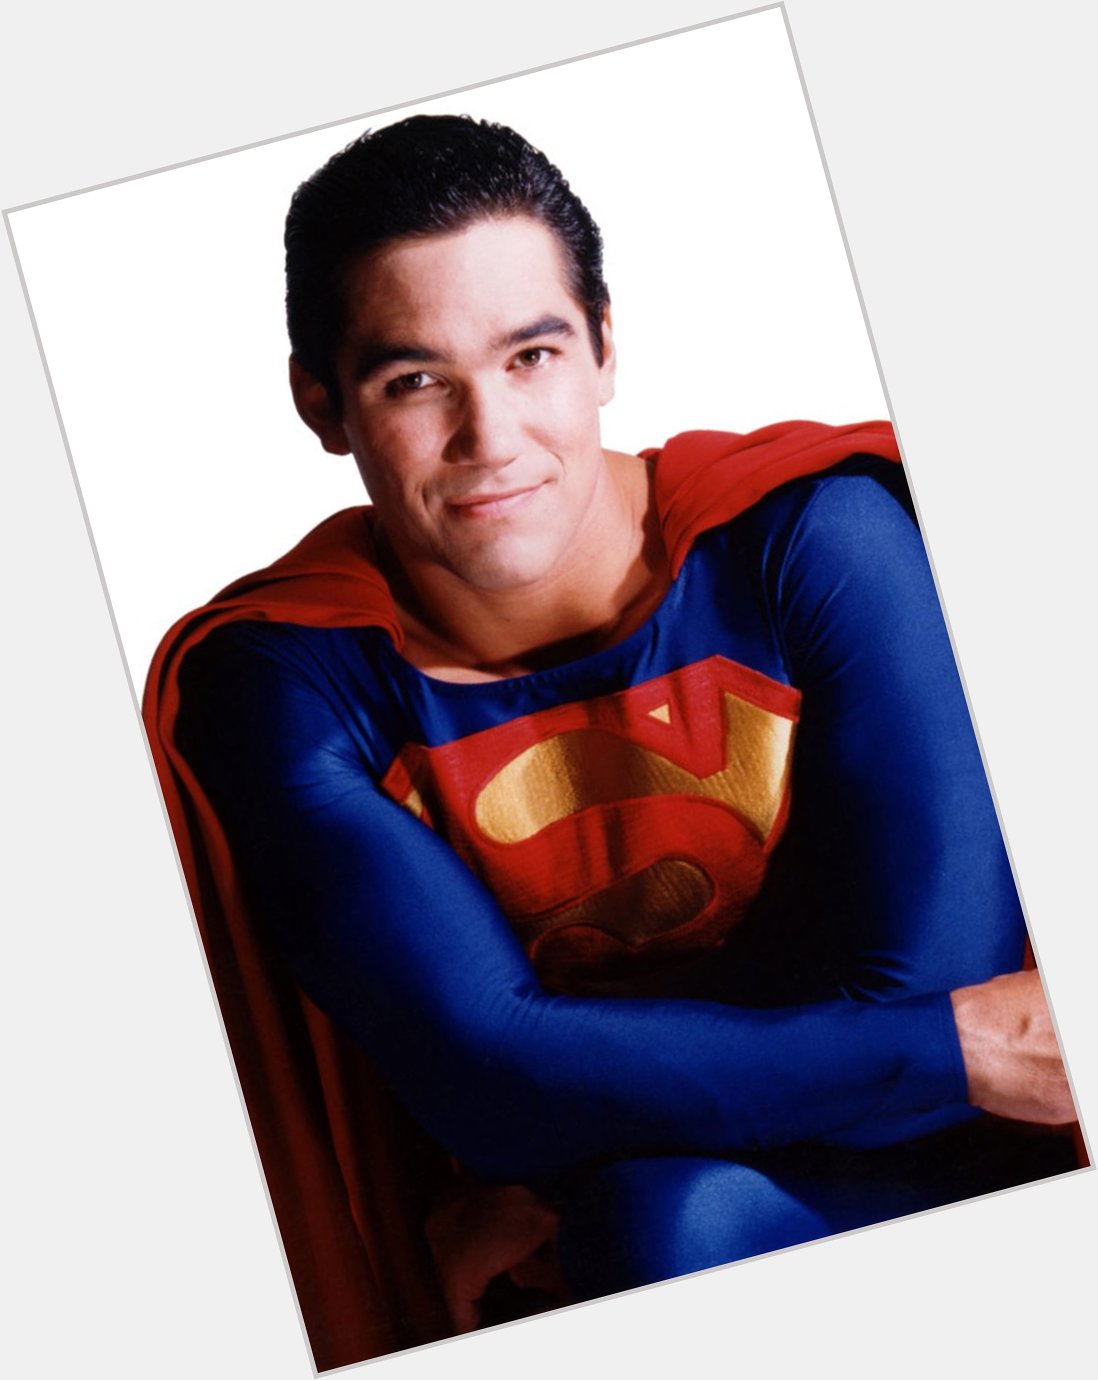 HAPPY BIRTHDAY to a real Superrman Dean Cain. 